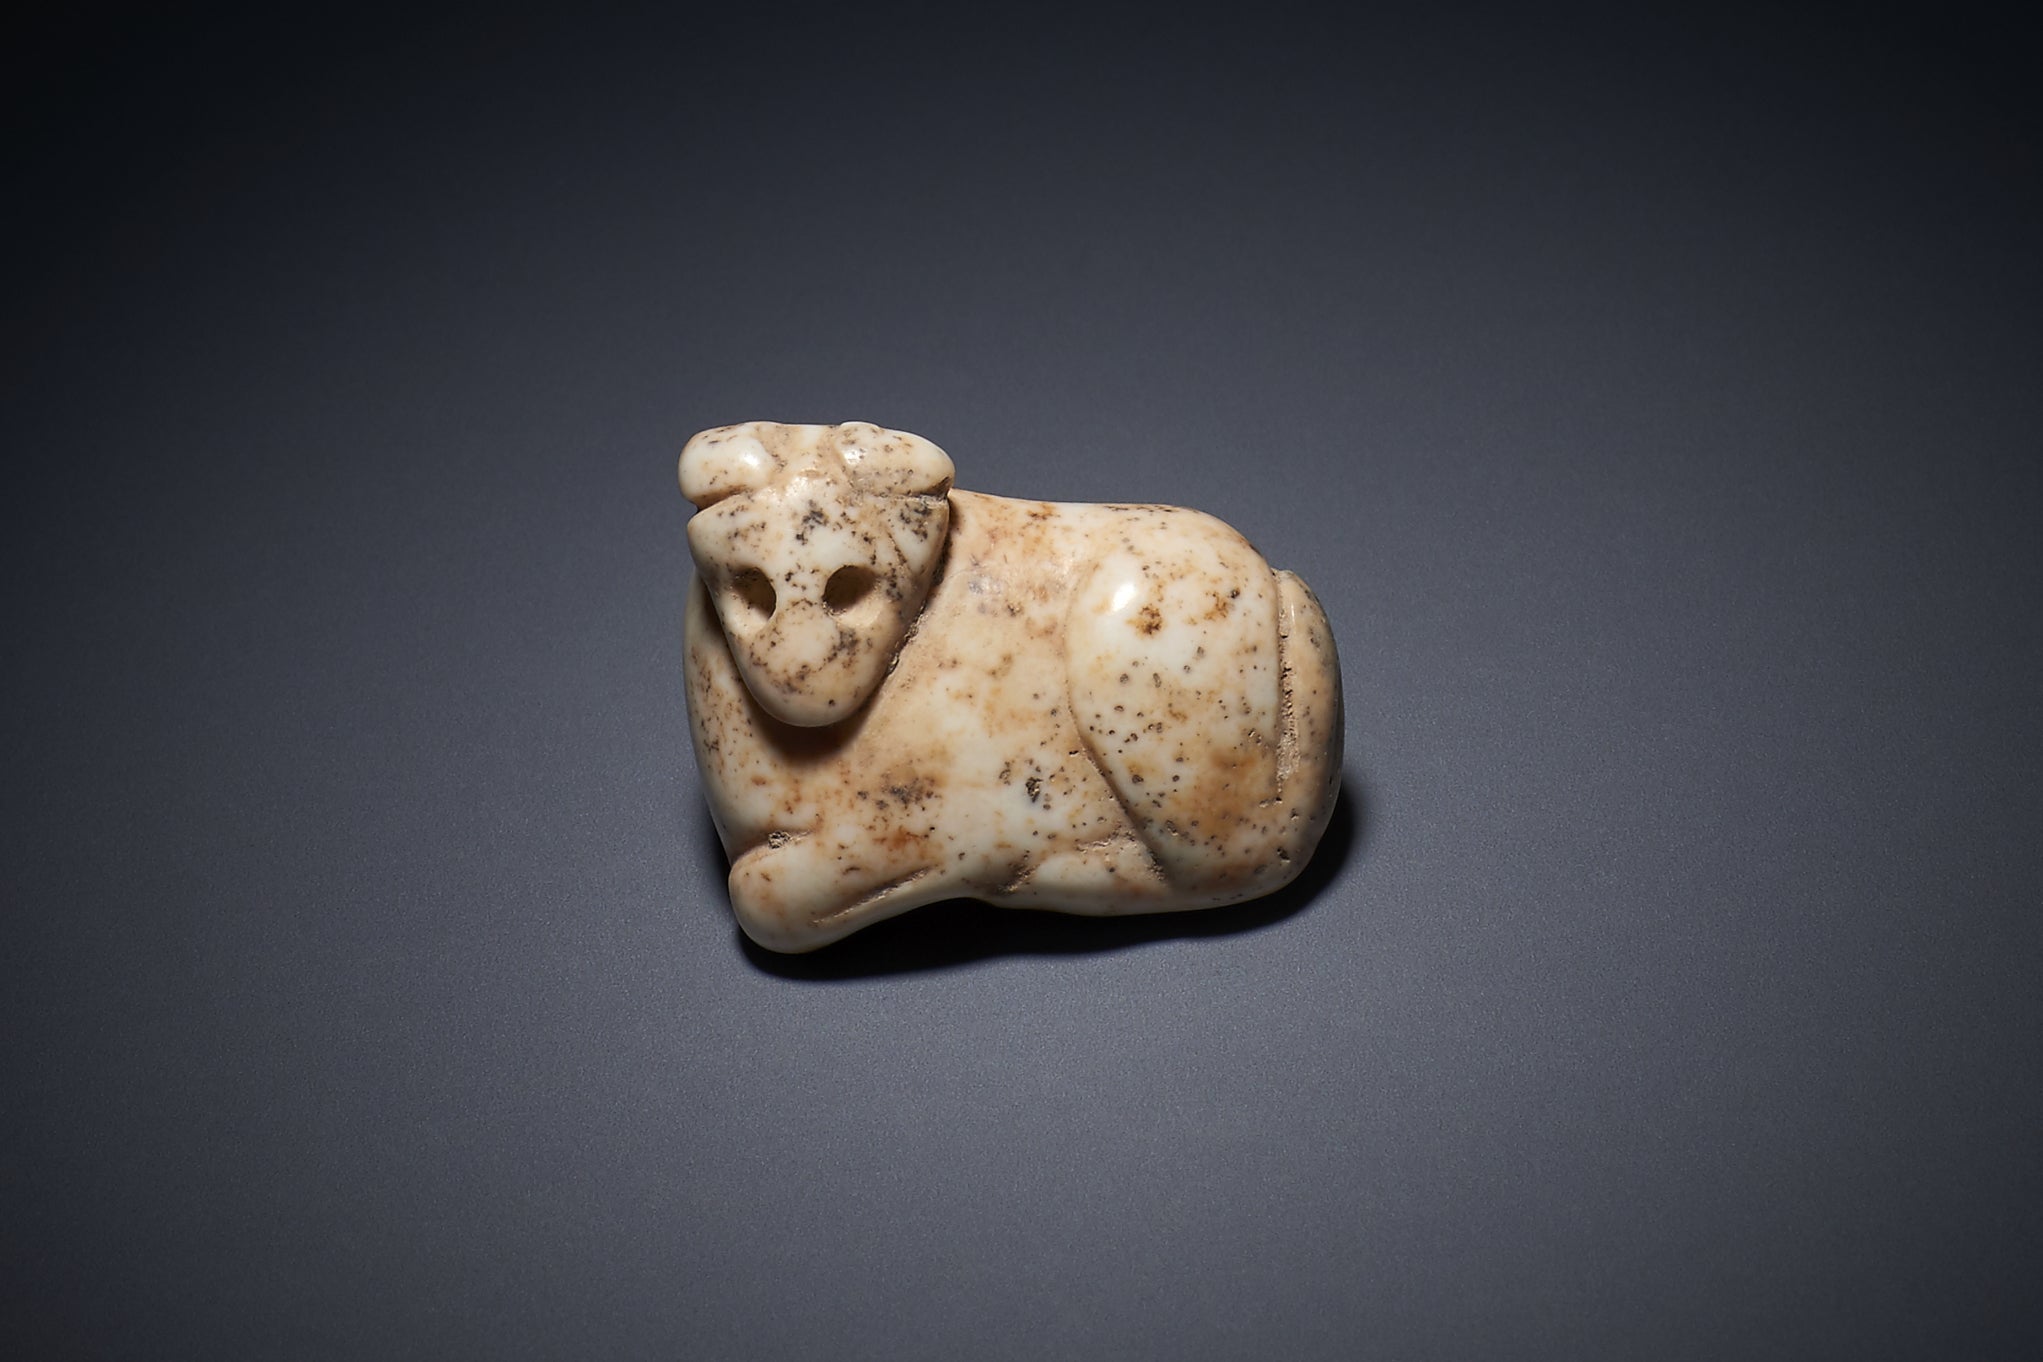 This white marble amulet is believed to have been crafted during the Jemdet Nasr period around 3000 BC